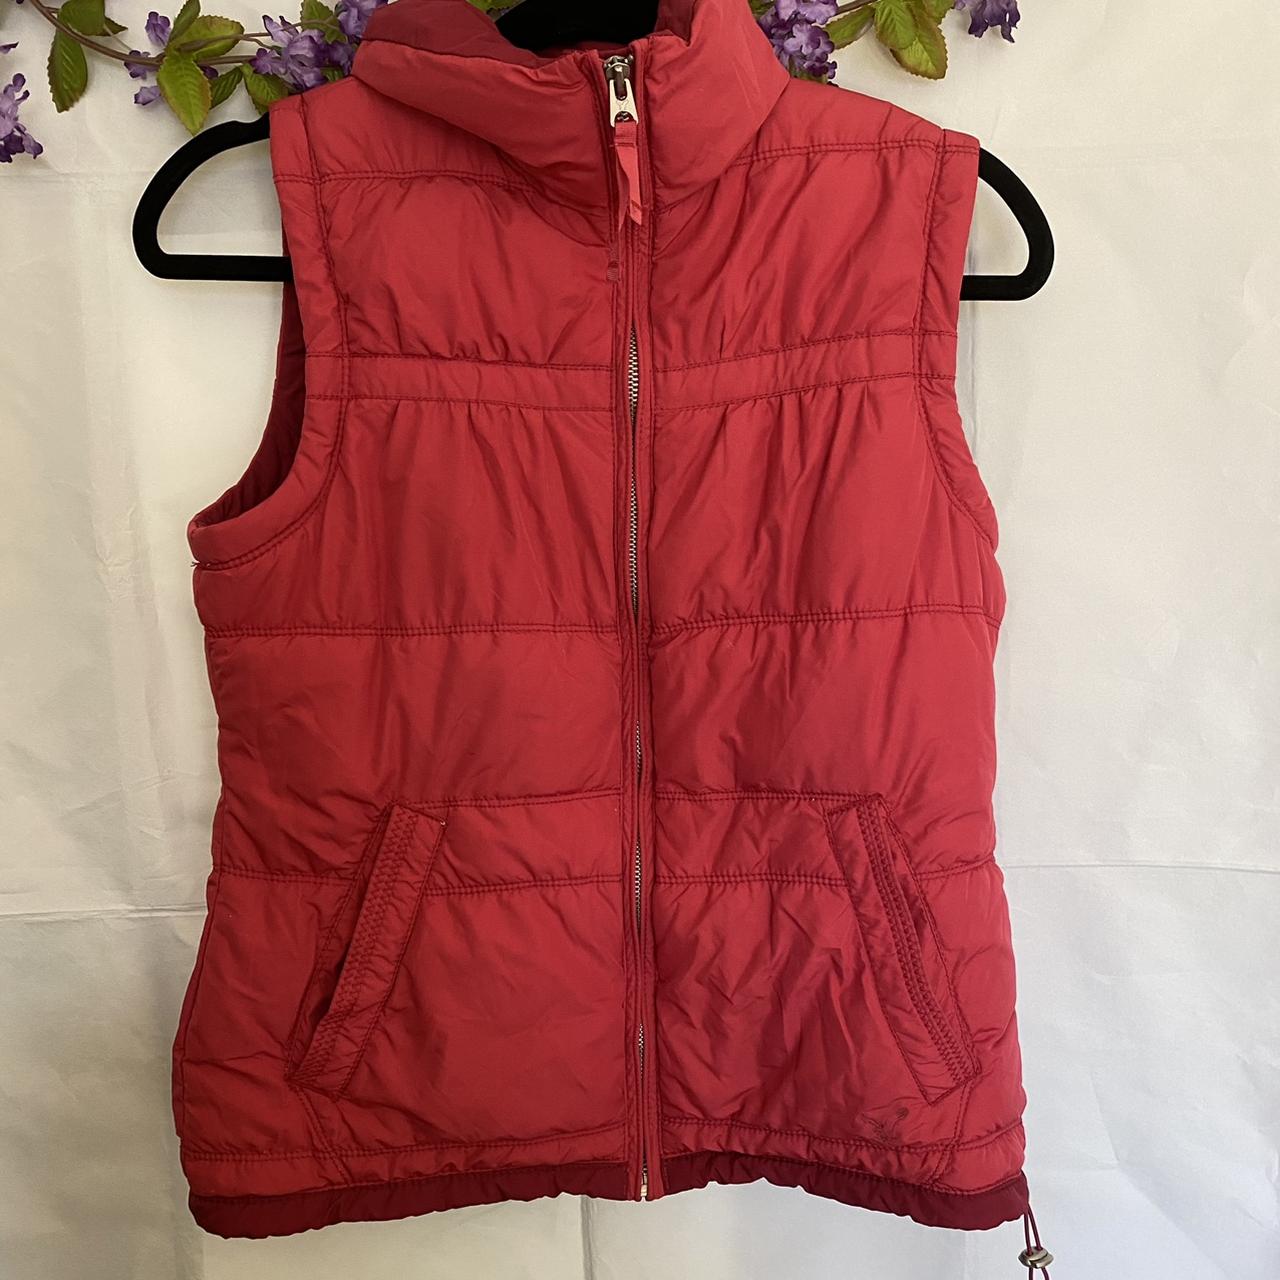 American Eagle Outfitters Women's Pink and Red Gilet | Depop